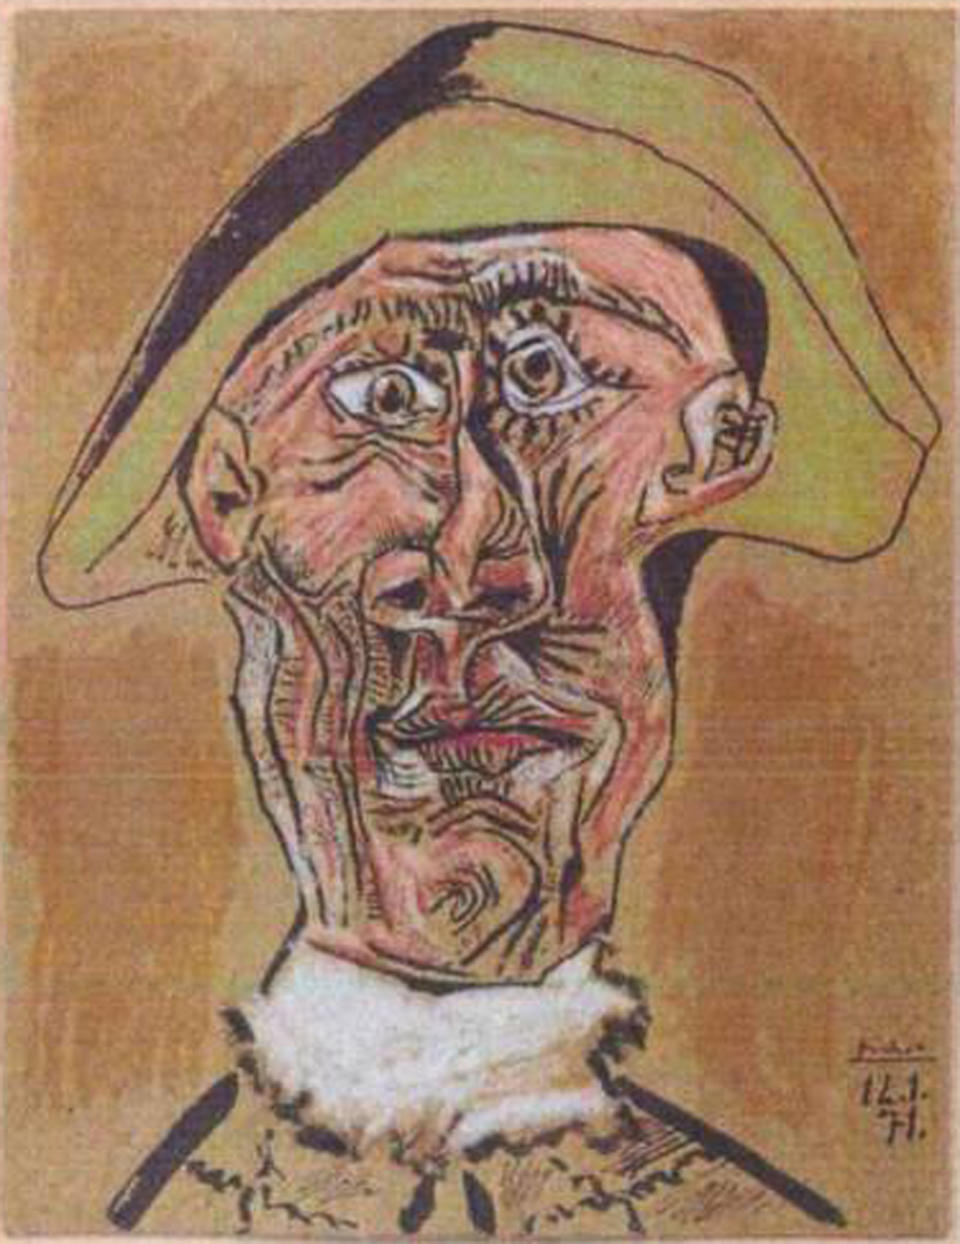 File - This photo released by the police in Rotterdam, Netherlands, on Tuesday, Oct. 16, 2012, shows the 1971 painting 'Harlequin Head' by Pablo Picasso. Romanian authorities have arrested three suspects in last year's multimillion euro (dollar) theft of paintings by Picasso, Matisse, Monet and others from a Netherlands art gallery, Dutch police said Tuesday, Jan. 22, 2013, but the stolen works have not been recovered. The seven pieces were swiped by thieves in October in a late night raid at the Kunsthal gallery in downtown Rotterdam. It was the biggest art theft in more than a decade in the Netherlands. The stolen works have an estimated value of tens of millions of dollars if they were sold at auction, but art experts said that would be impossible following the theft. (AP Photo / Police Rotterdam, File)